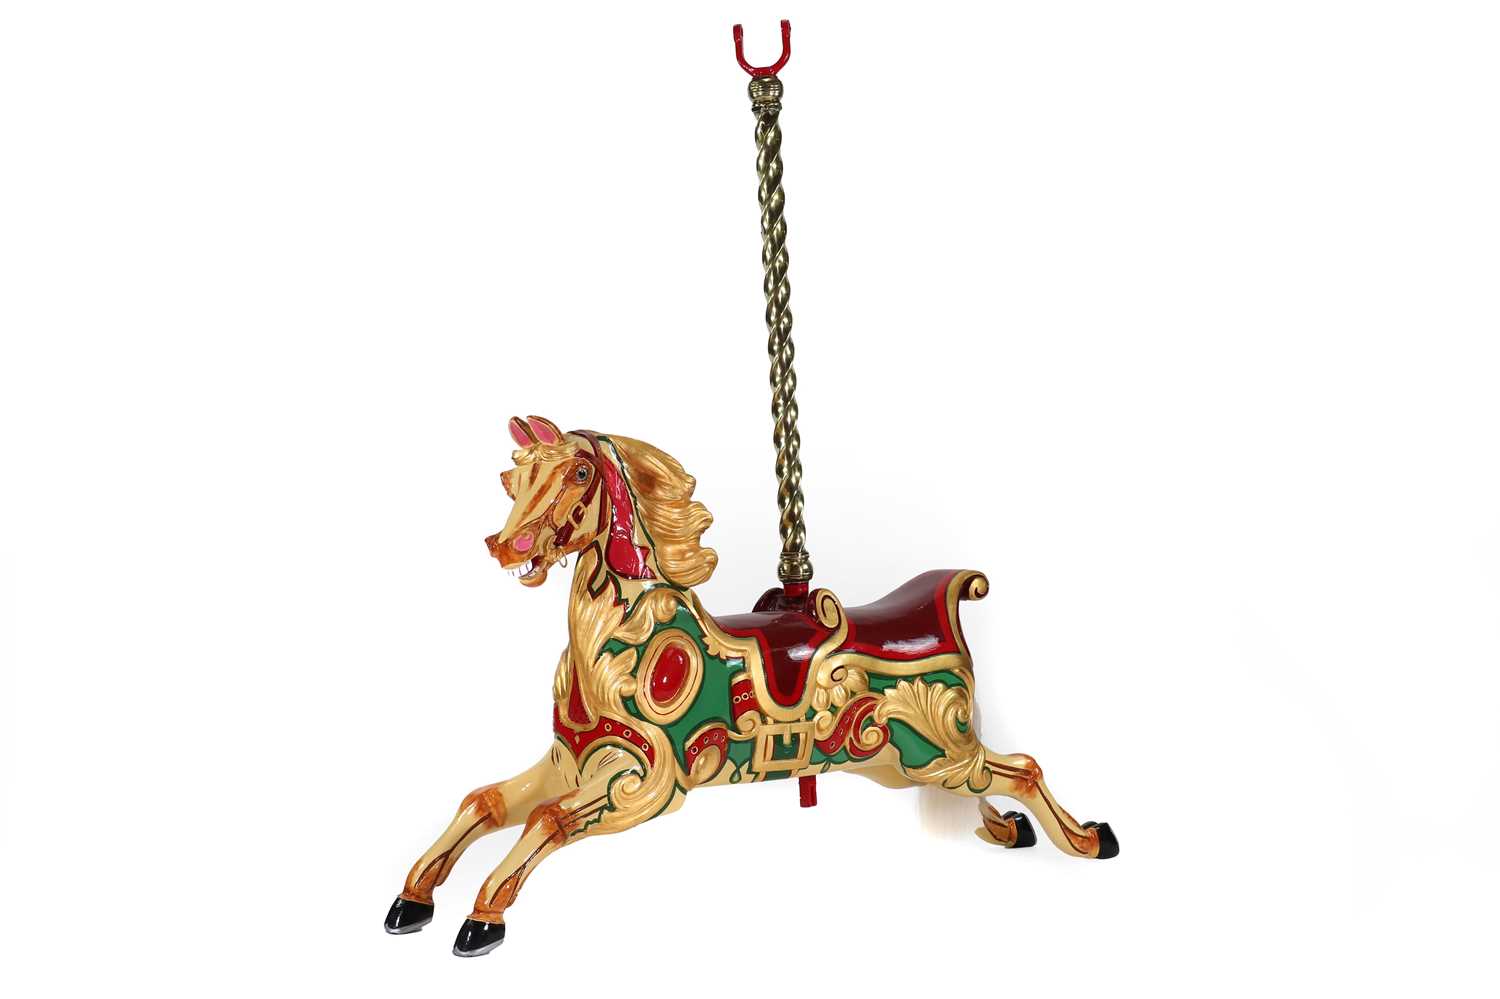 Lot 14 - A double-seat fairground carousel galloper horse by Anderson